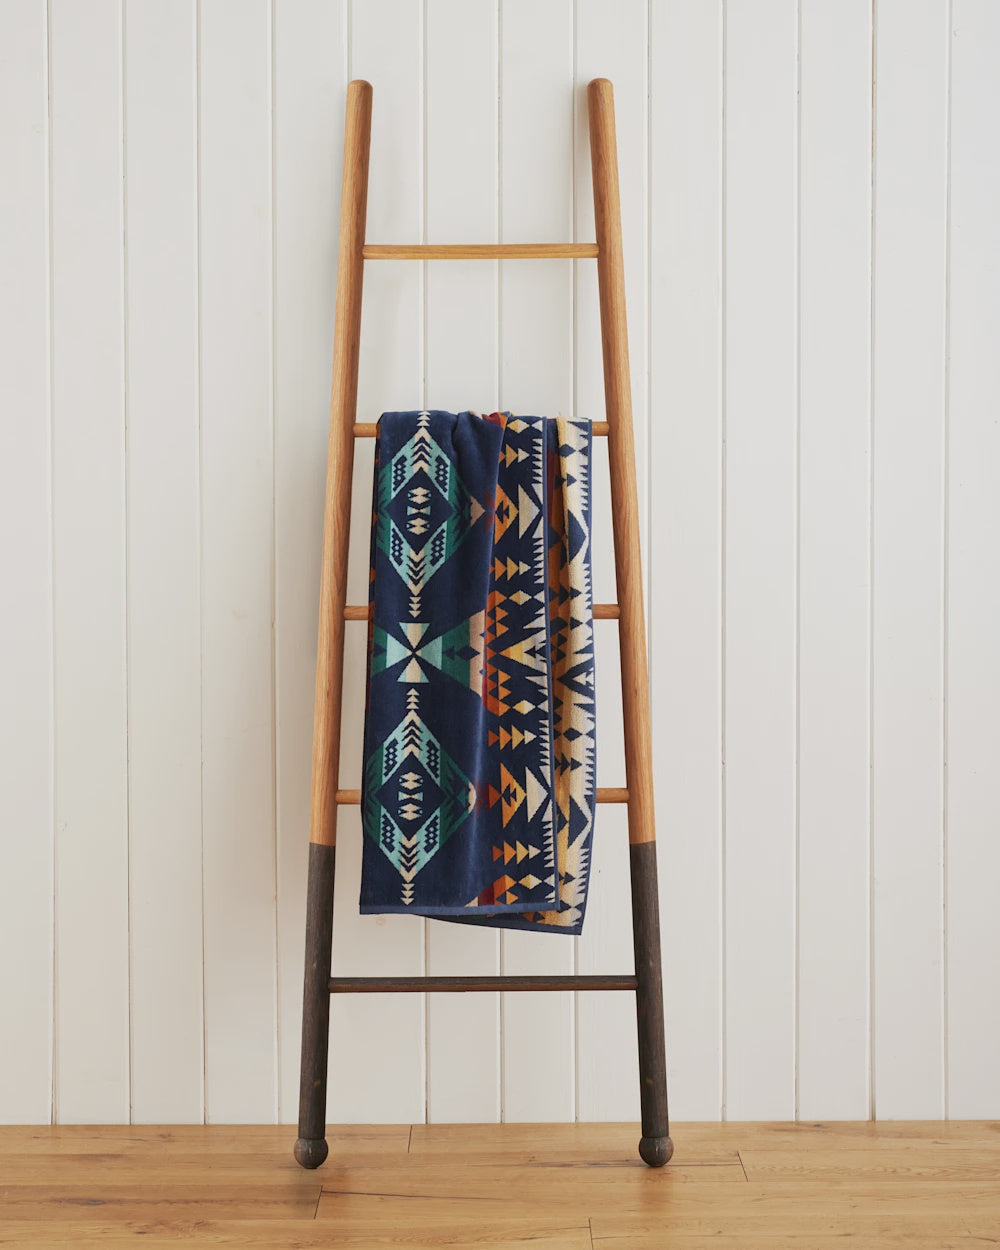 A wooden ladder leaning against a white wall in a Scottsdale Arizona bungalow, with a Pendleton/Babblitt's Wholesale spa towel draped over its middle rung. The spa towel features blue, orange, and white geometric designs.